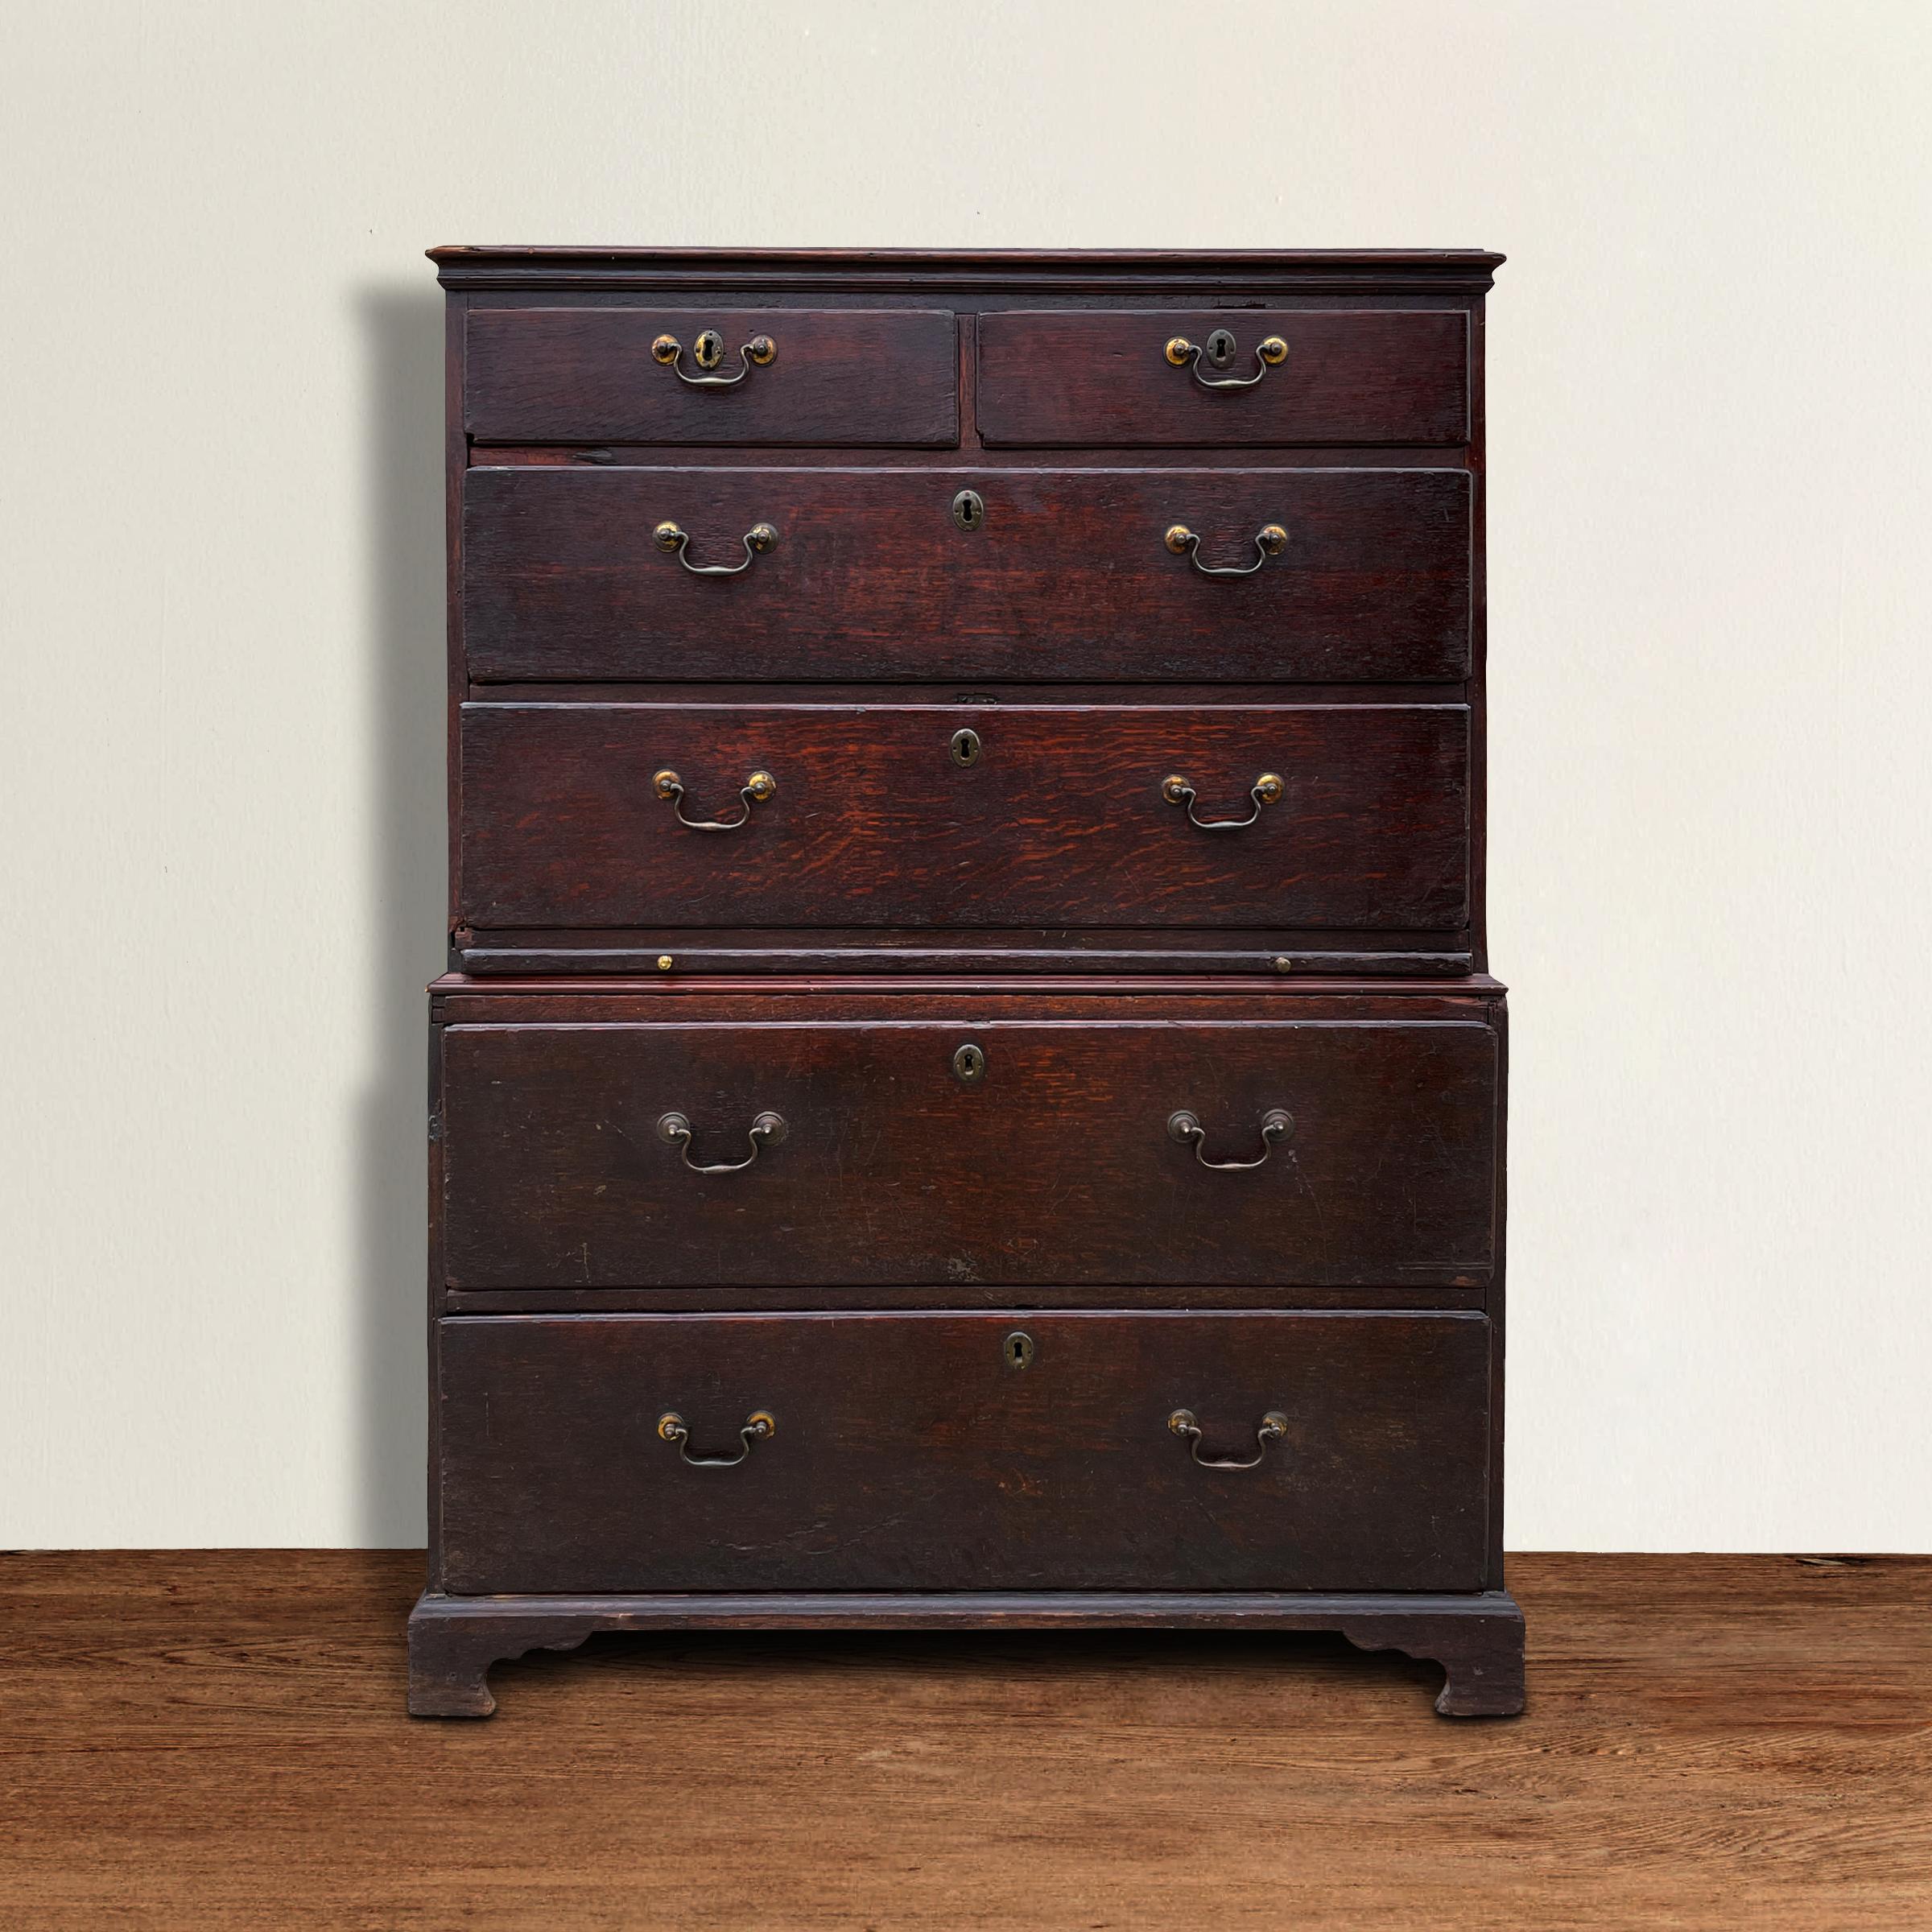 A fantastic late 18th century American oak chest on chest with six drawers each with pine secondary wood, brass pulls, and a wonderful overall rich dark sangre-de-boeuf finish with a patina only two hundred years of use can bestow. Perfect as a